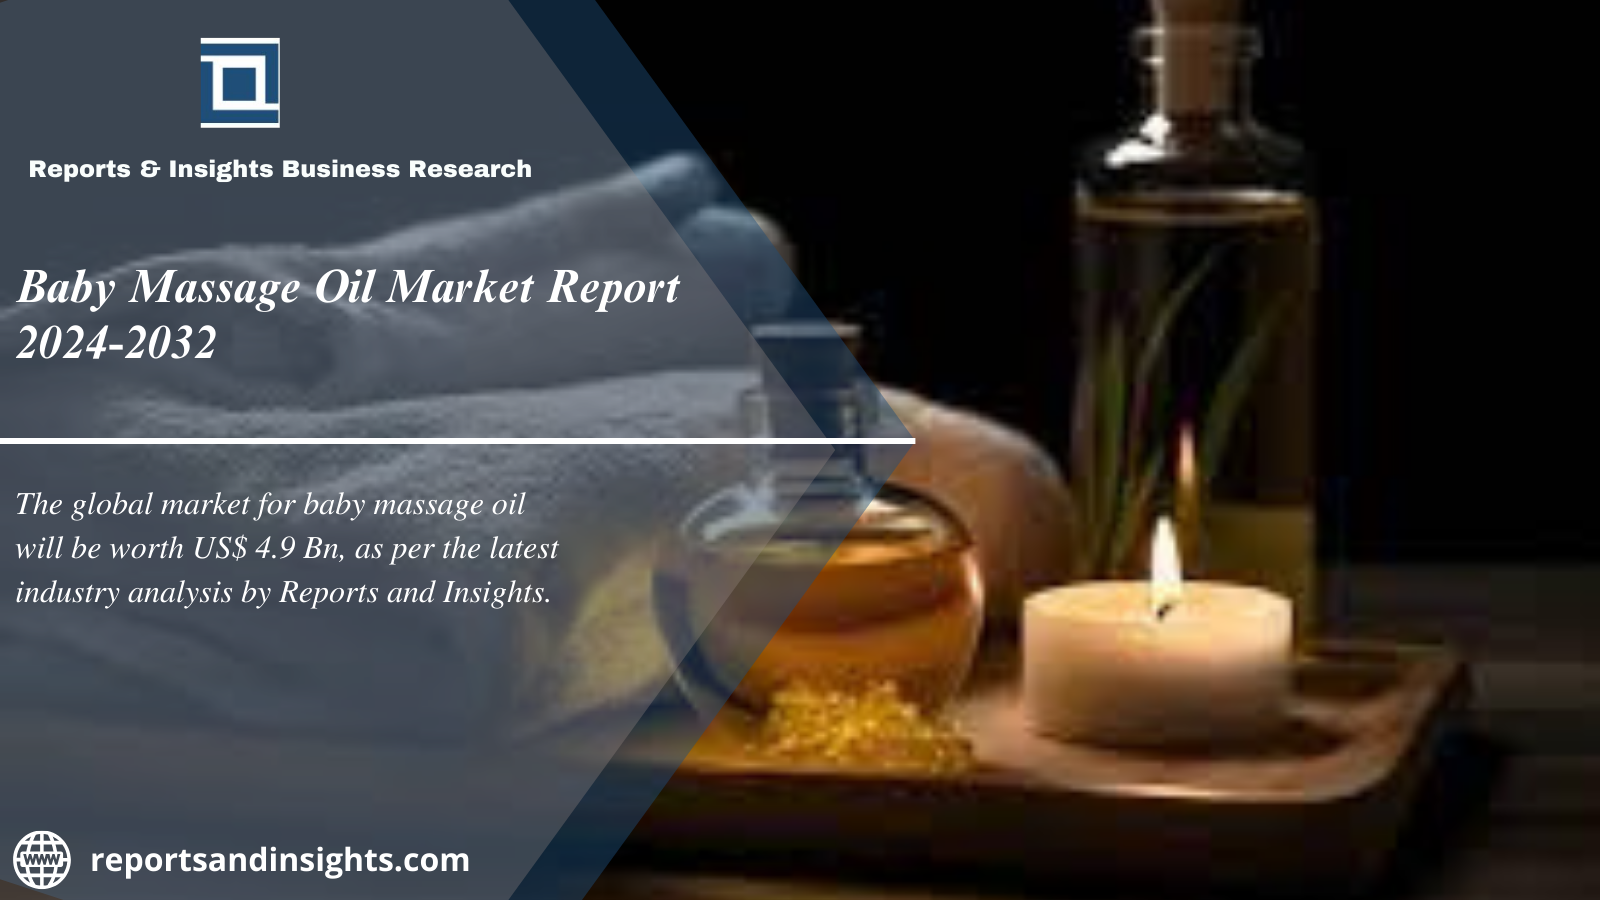 Baby Massage Oil Market 2024-2032: Trends, Growth, Share, Size and Leading Players